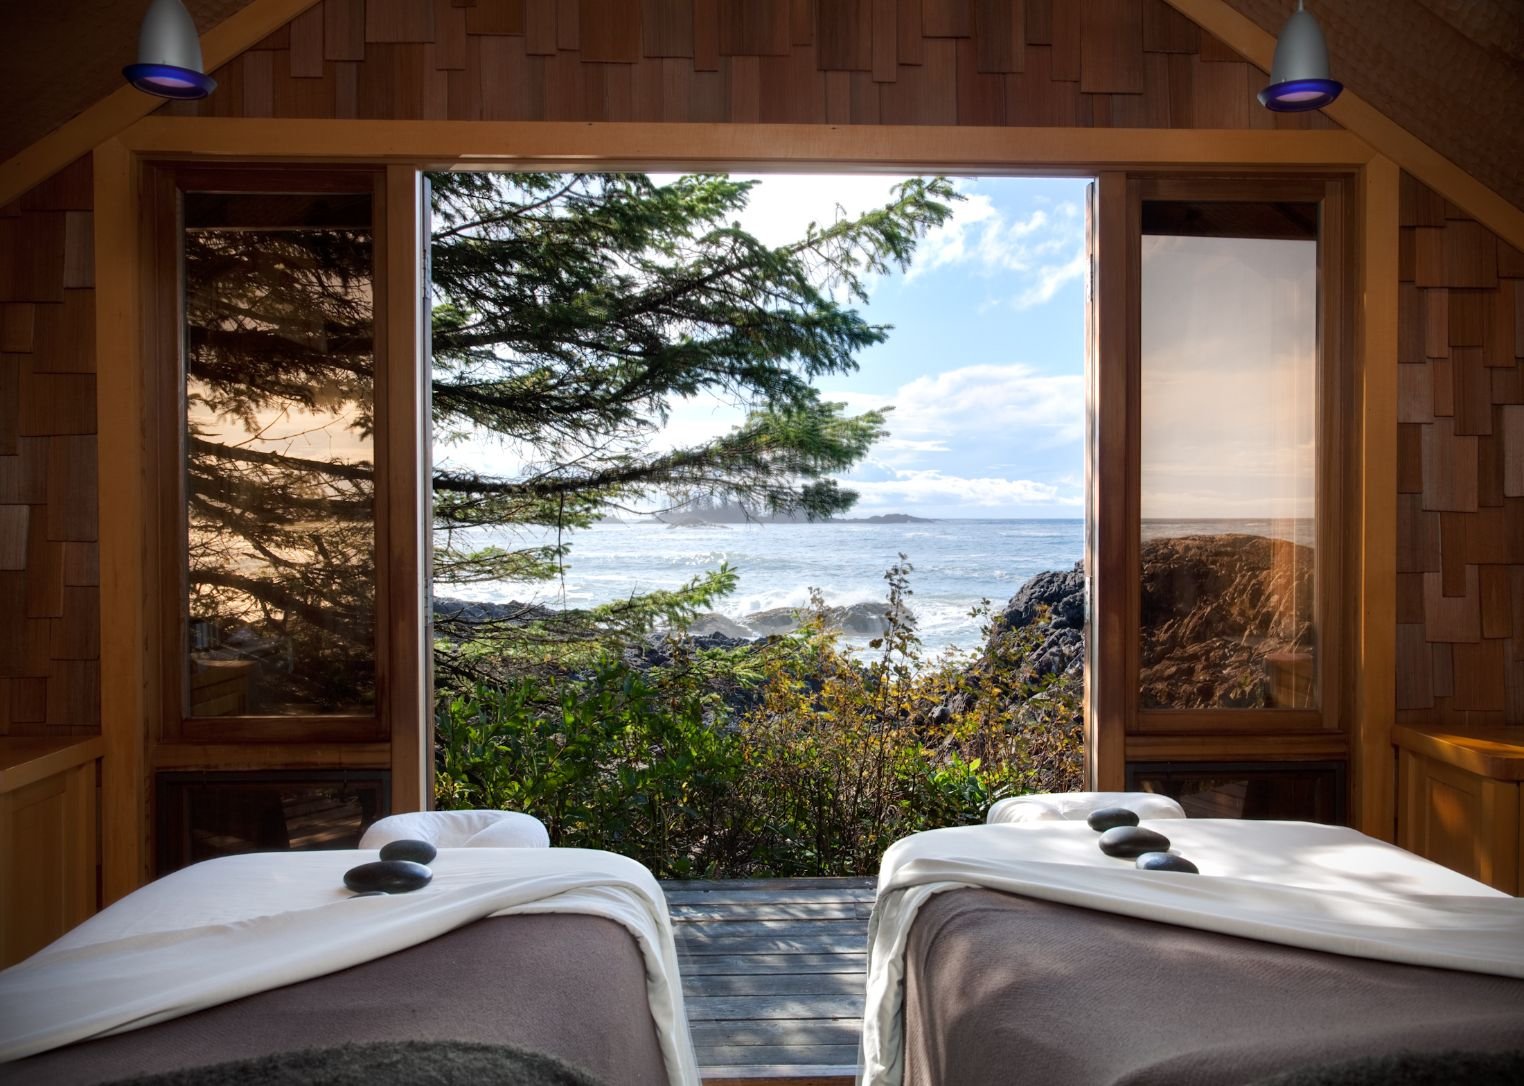 The Wickaninnish Inn, Vancouver Island - Hotel Windows - The Most Perfect View (14).jpg